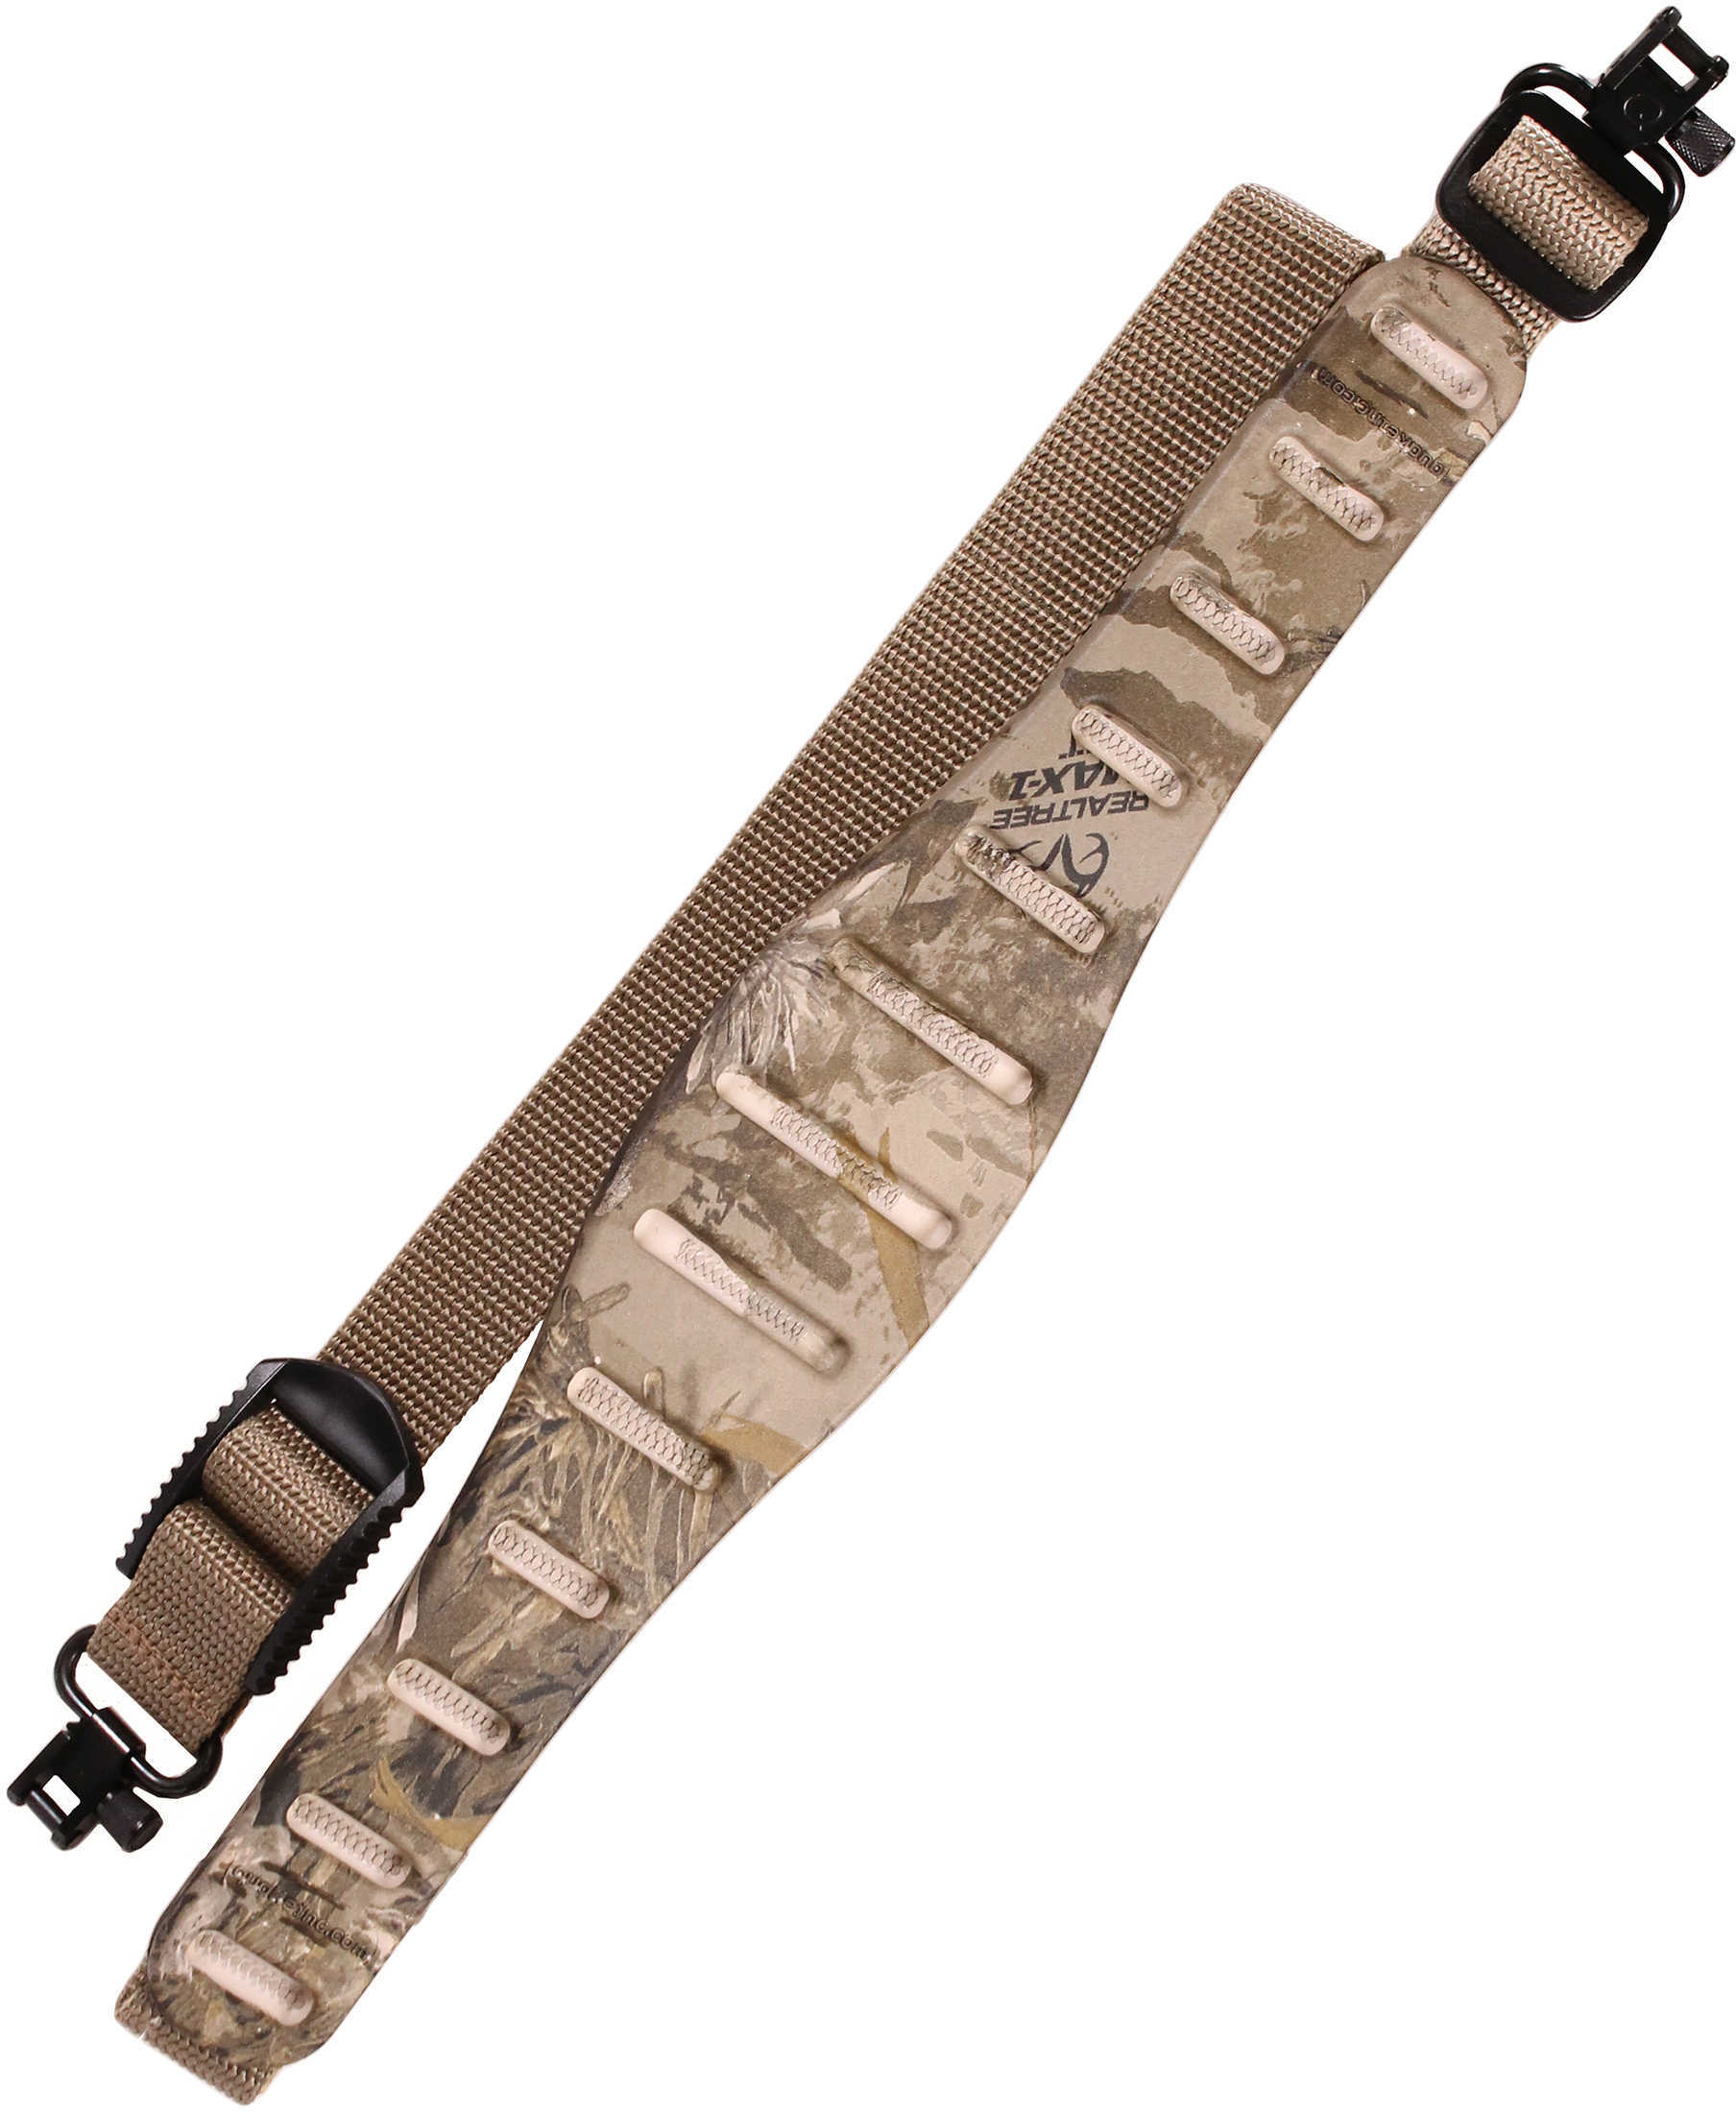 Claw Contour Rifle Sling Realtree Max-1HD